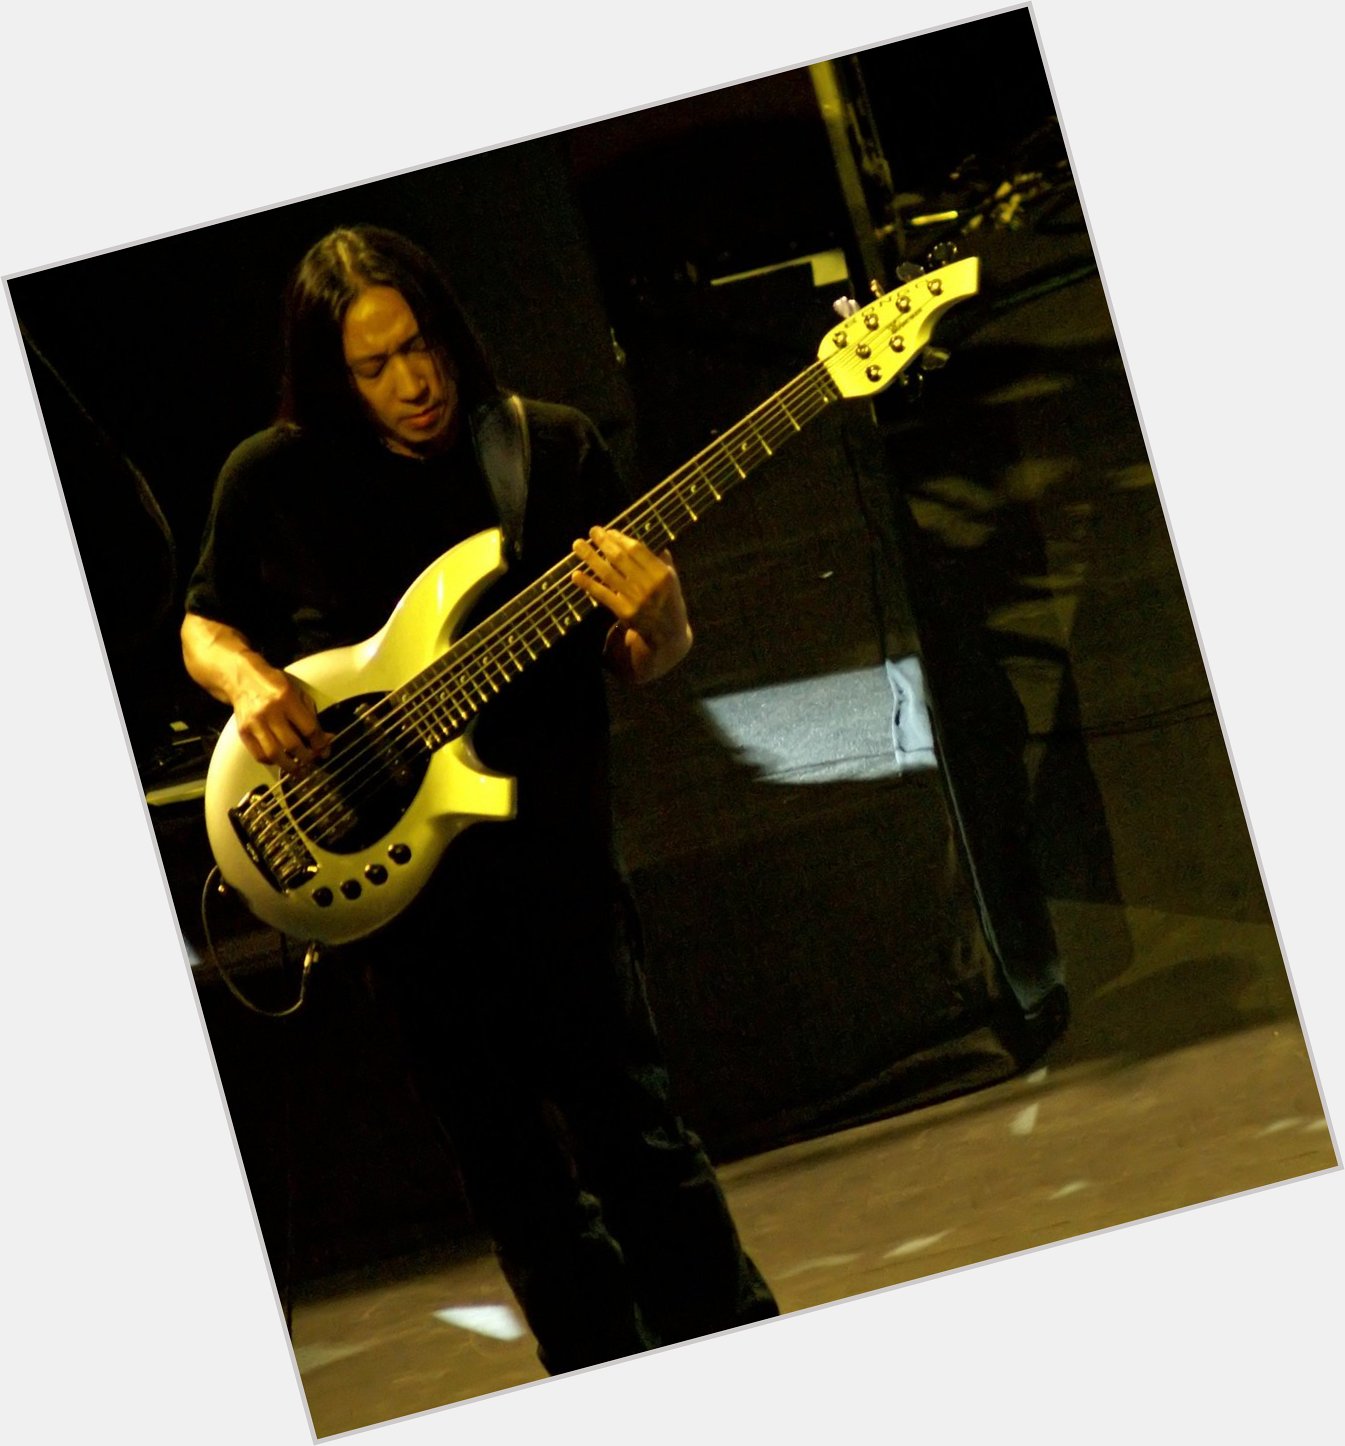 Happy 52nd Birthday John Myung   . Your Bass licks make me fall into the light    